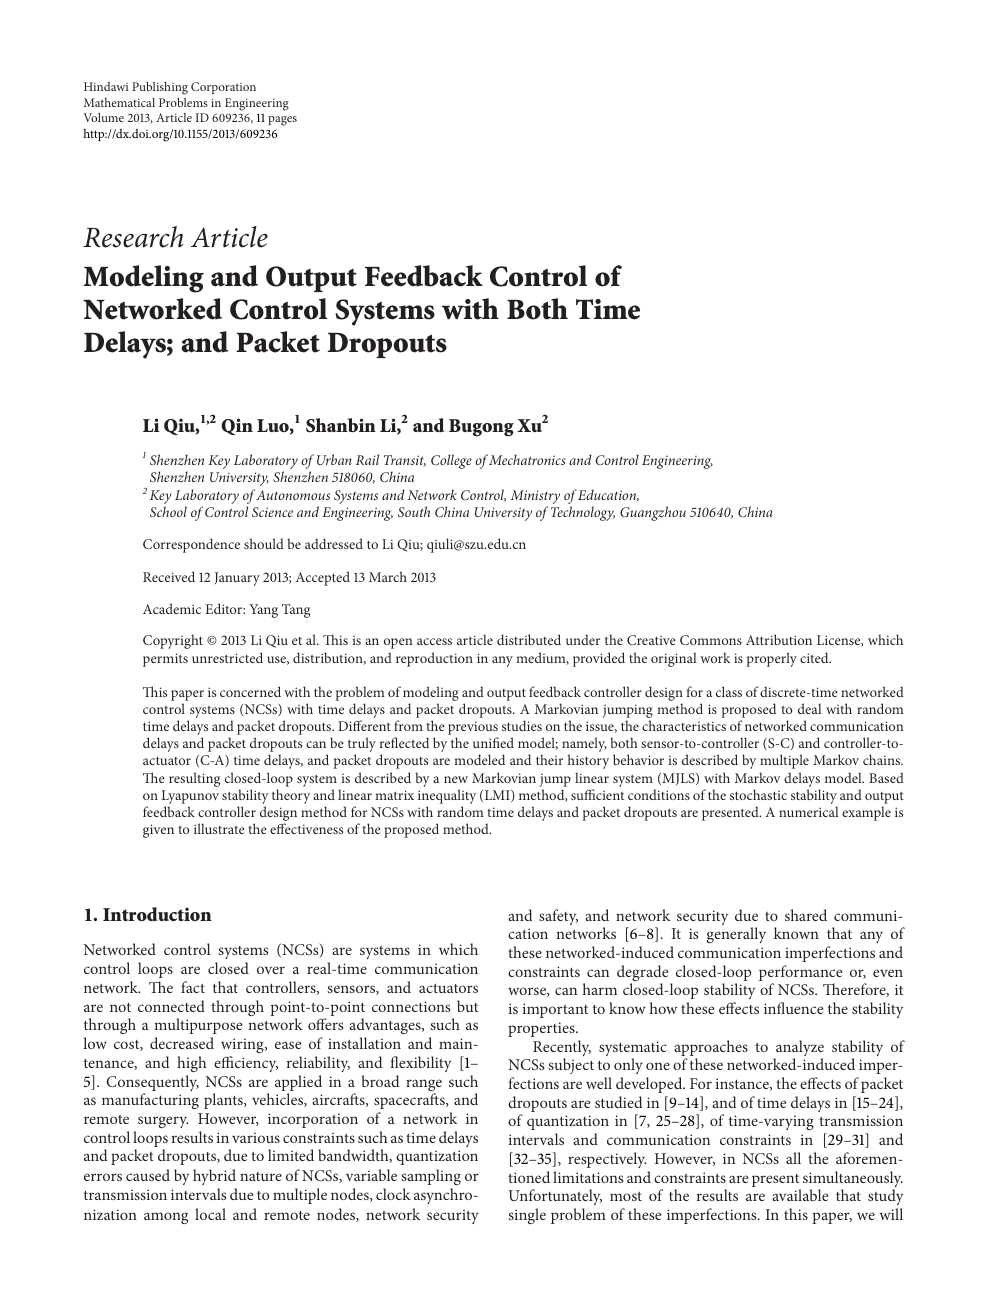 Modeling And Output Feedback Control Of Networked Control Systems With Both Time Delays And Packet Dropouts Topic Of Research Paper In Mathematics Download Scholarly Article Pdf And Read For Free On